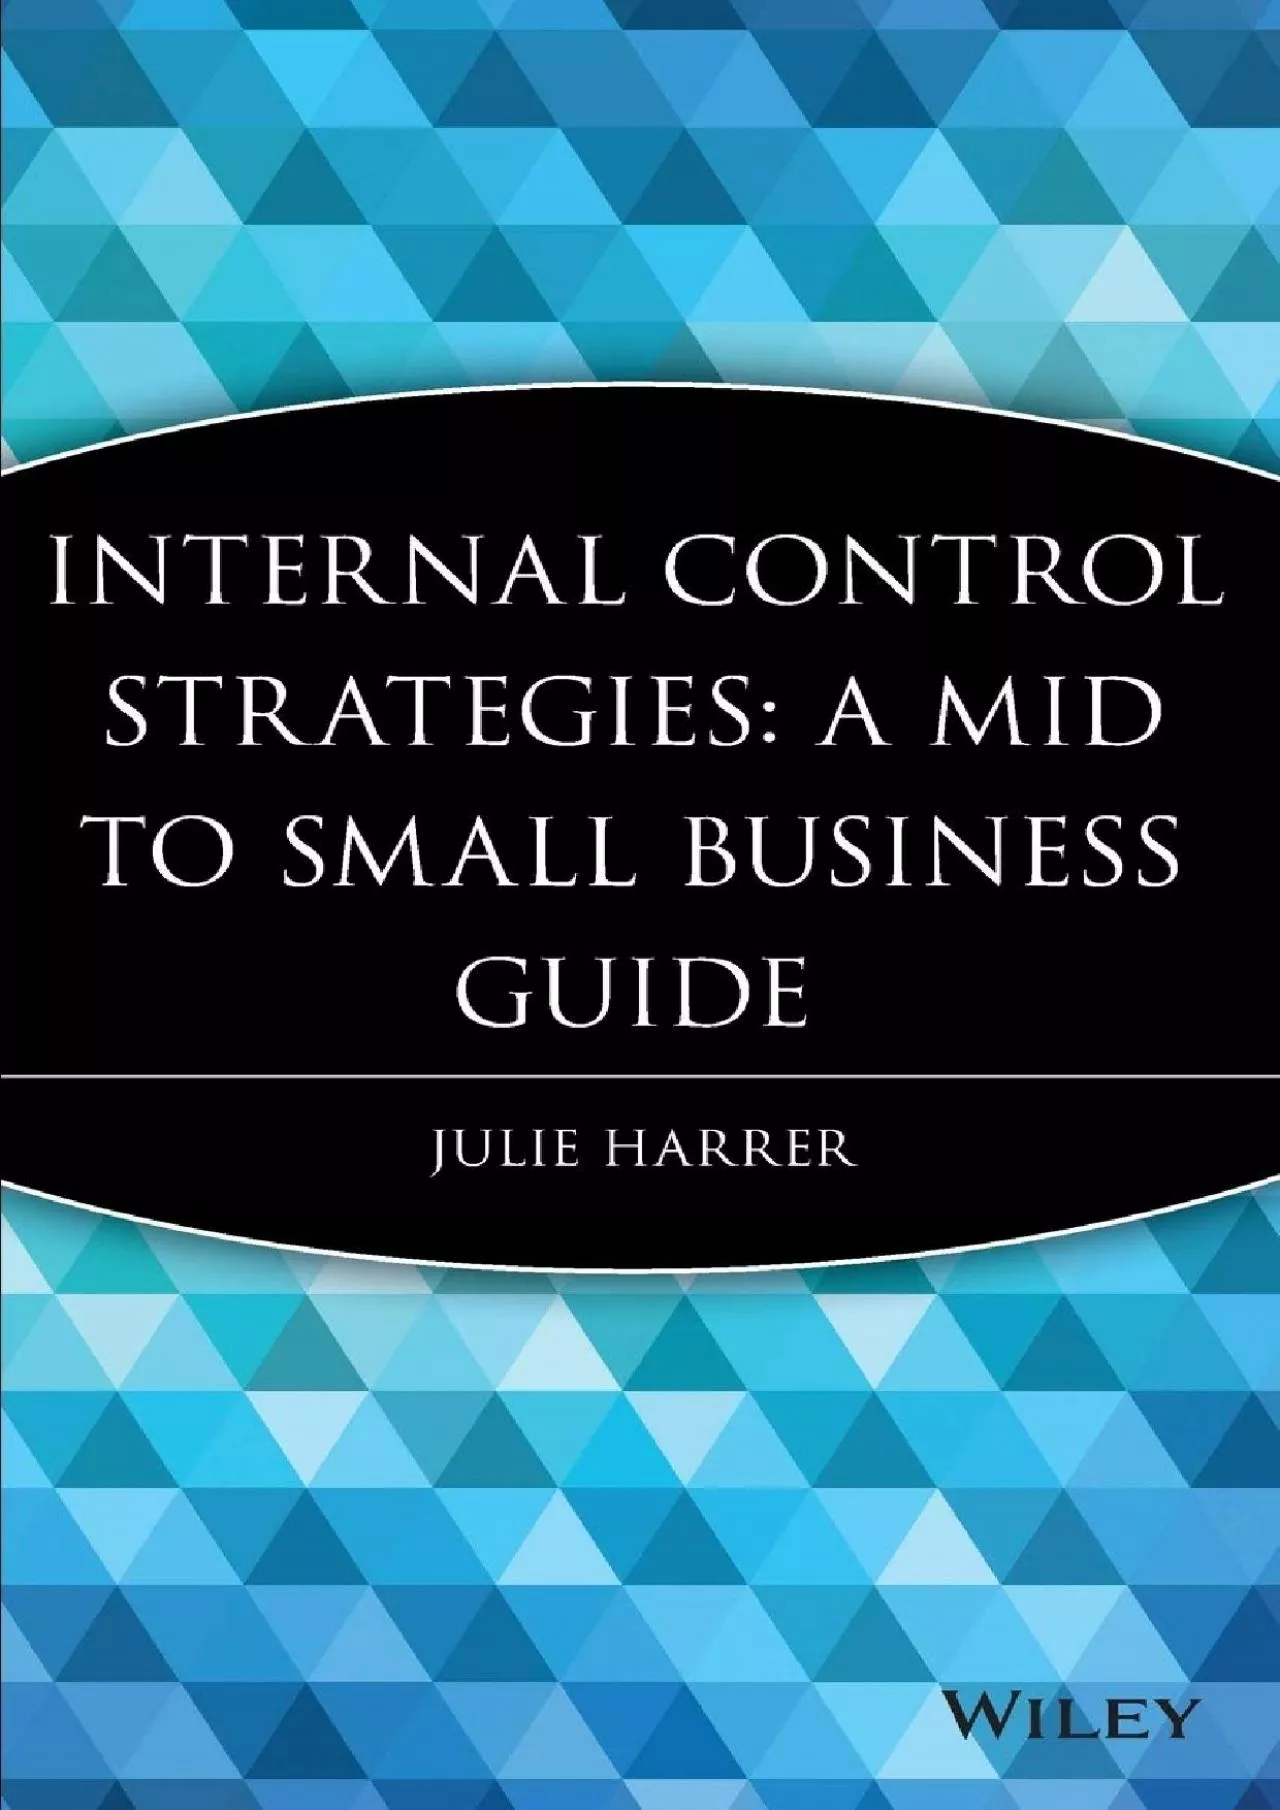 (BOOK)-Internal Control Strategies: A Mid to Small Business Guide